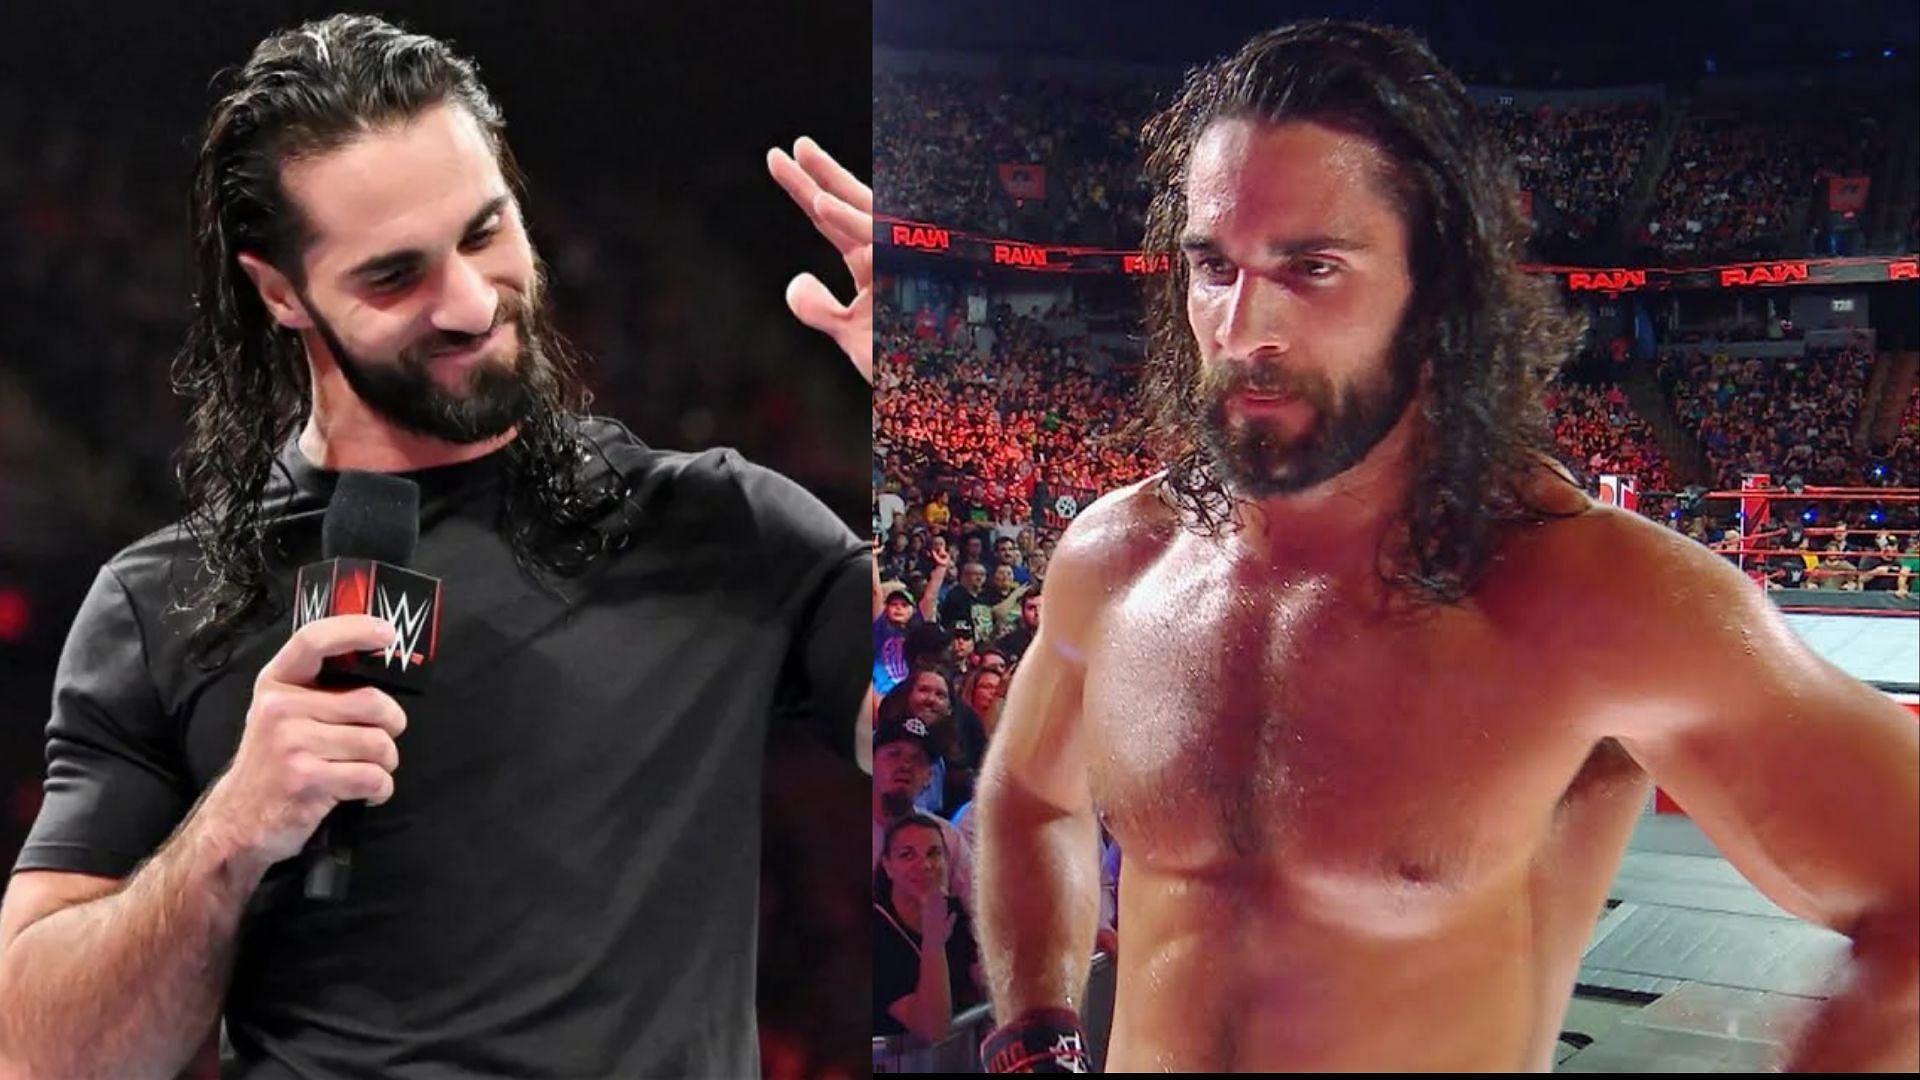 Seth Rollins has been in the news a lot lately